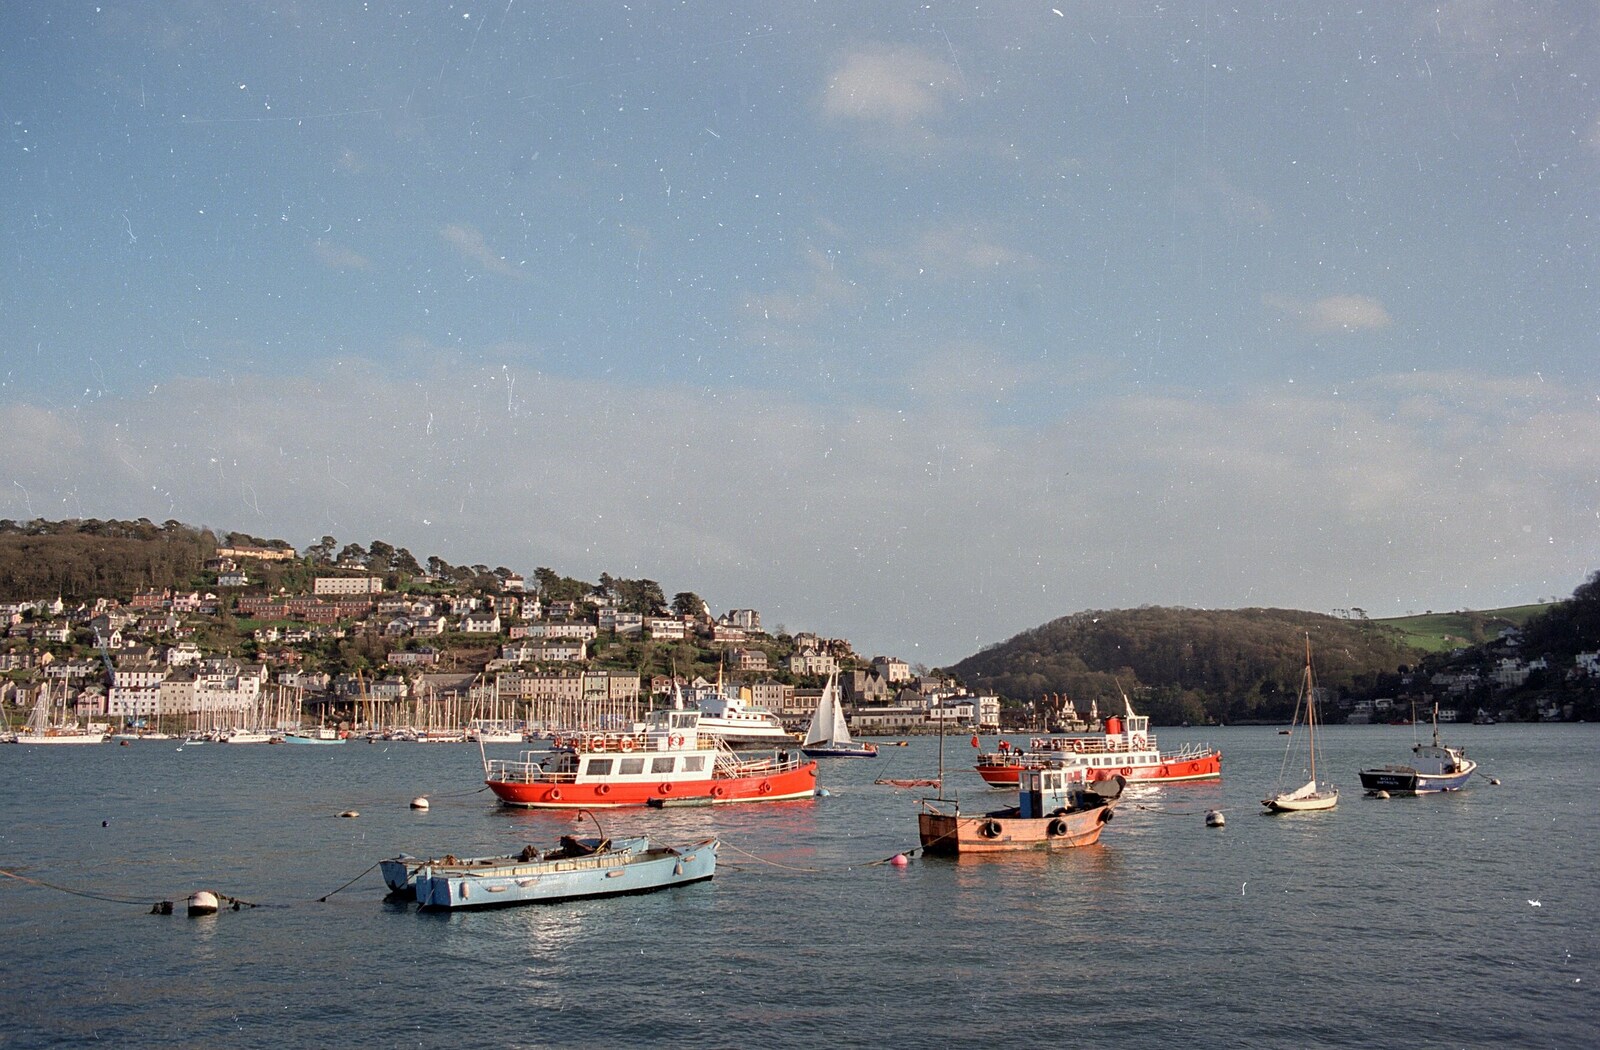 A view of Kingswear from Dartmouth from Uni: Totnes and Dartmoor Pasties, Devon - 2nd March 1989